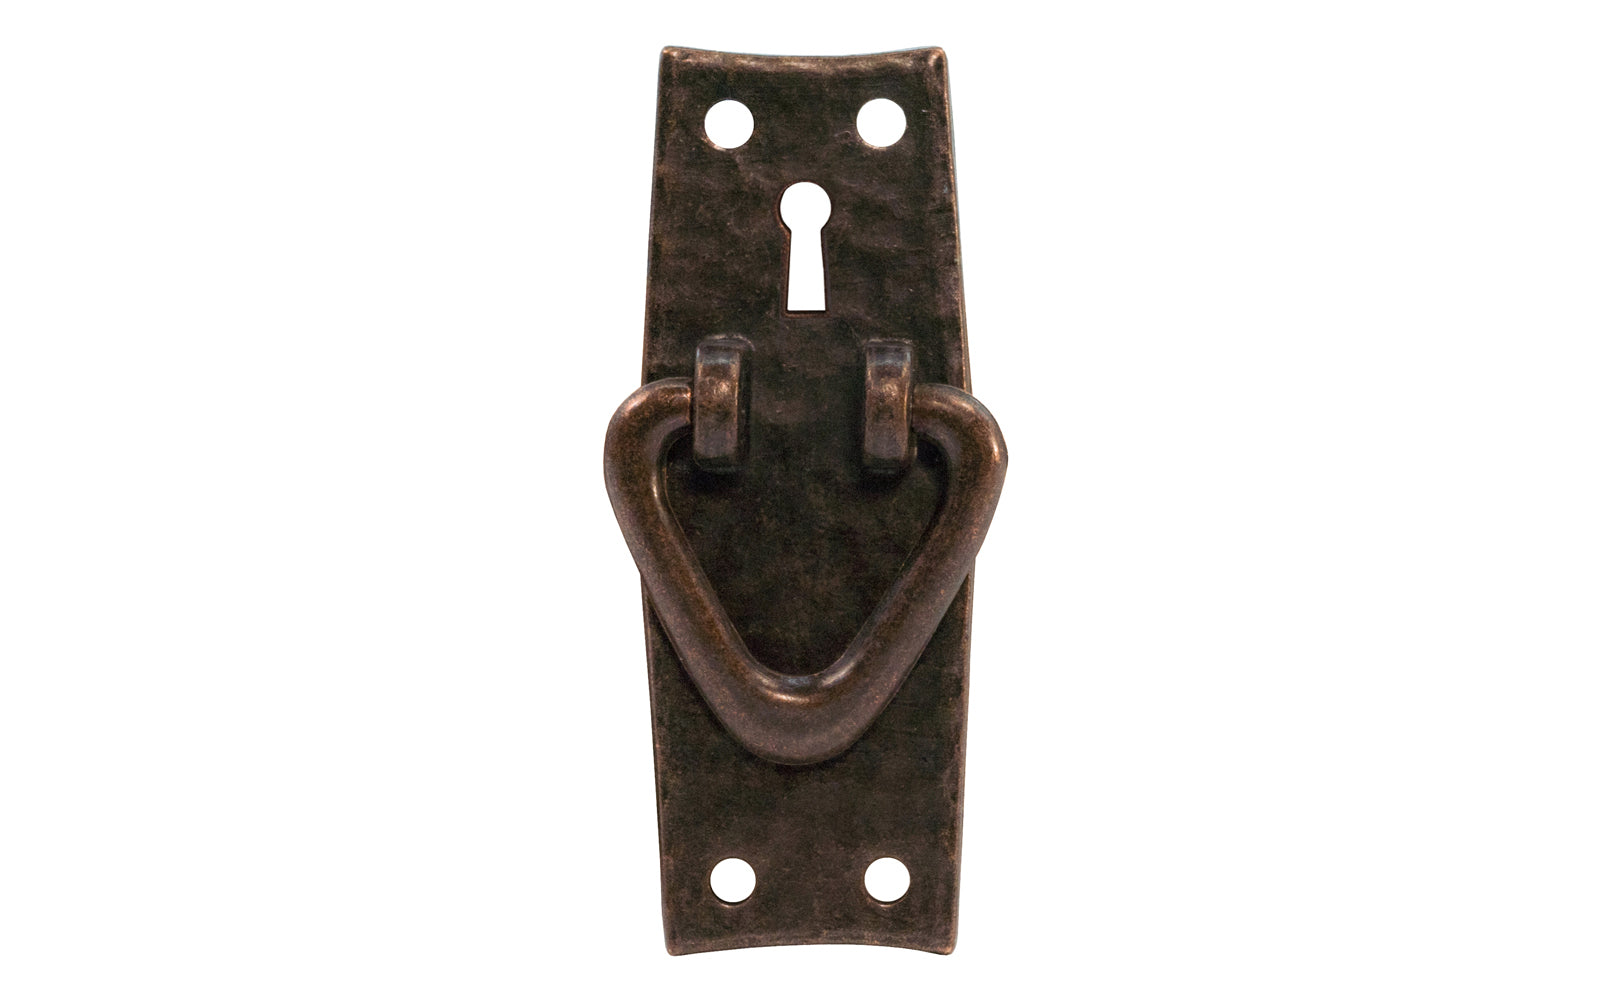 Vintage-style Hardware · Solid Brass Hammered Keyhole & Drop Pull. Designed in the Mission or Arts & Crafts style, Gustav Stickley style hardware. Rustic hammered drop pull. Antique copper finish. Includes round-head slotted screws. Thick solid brass drop pull plate. 4